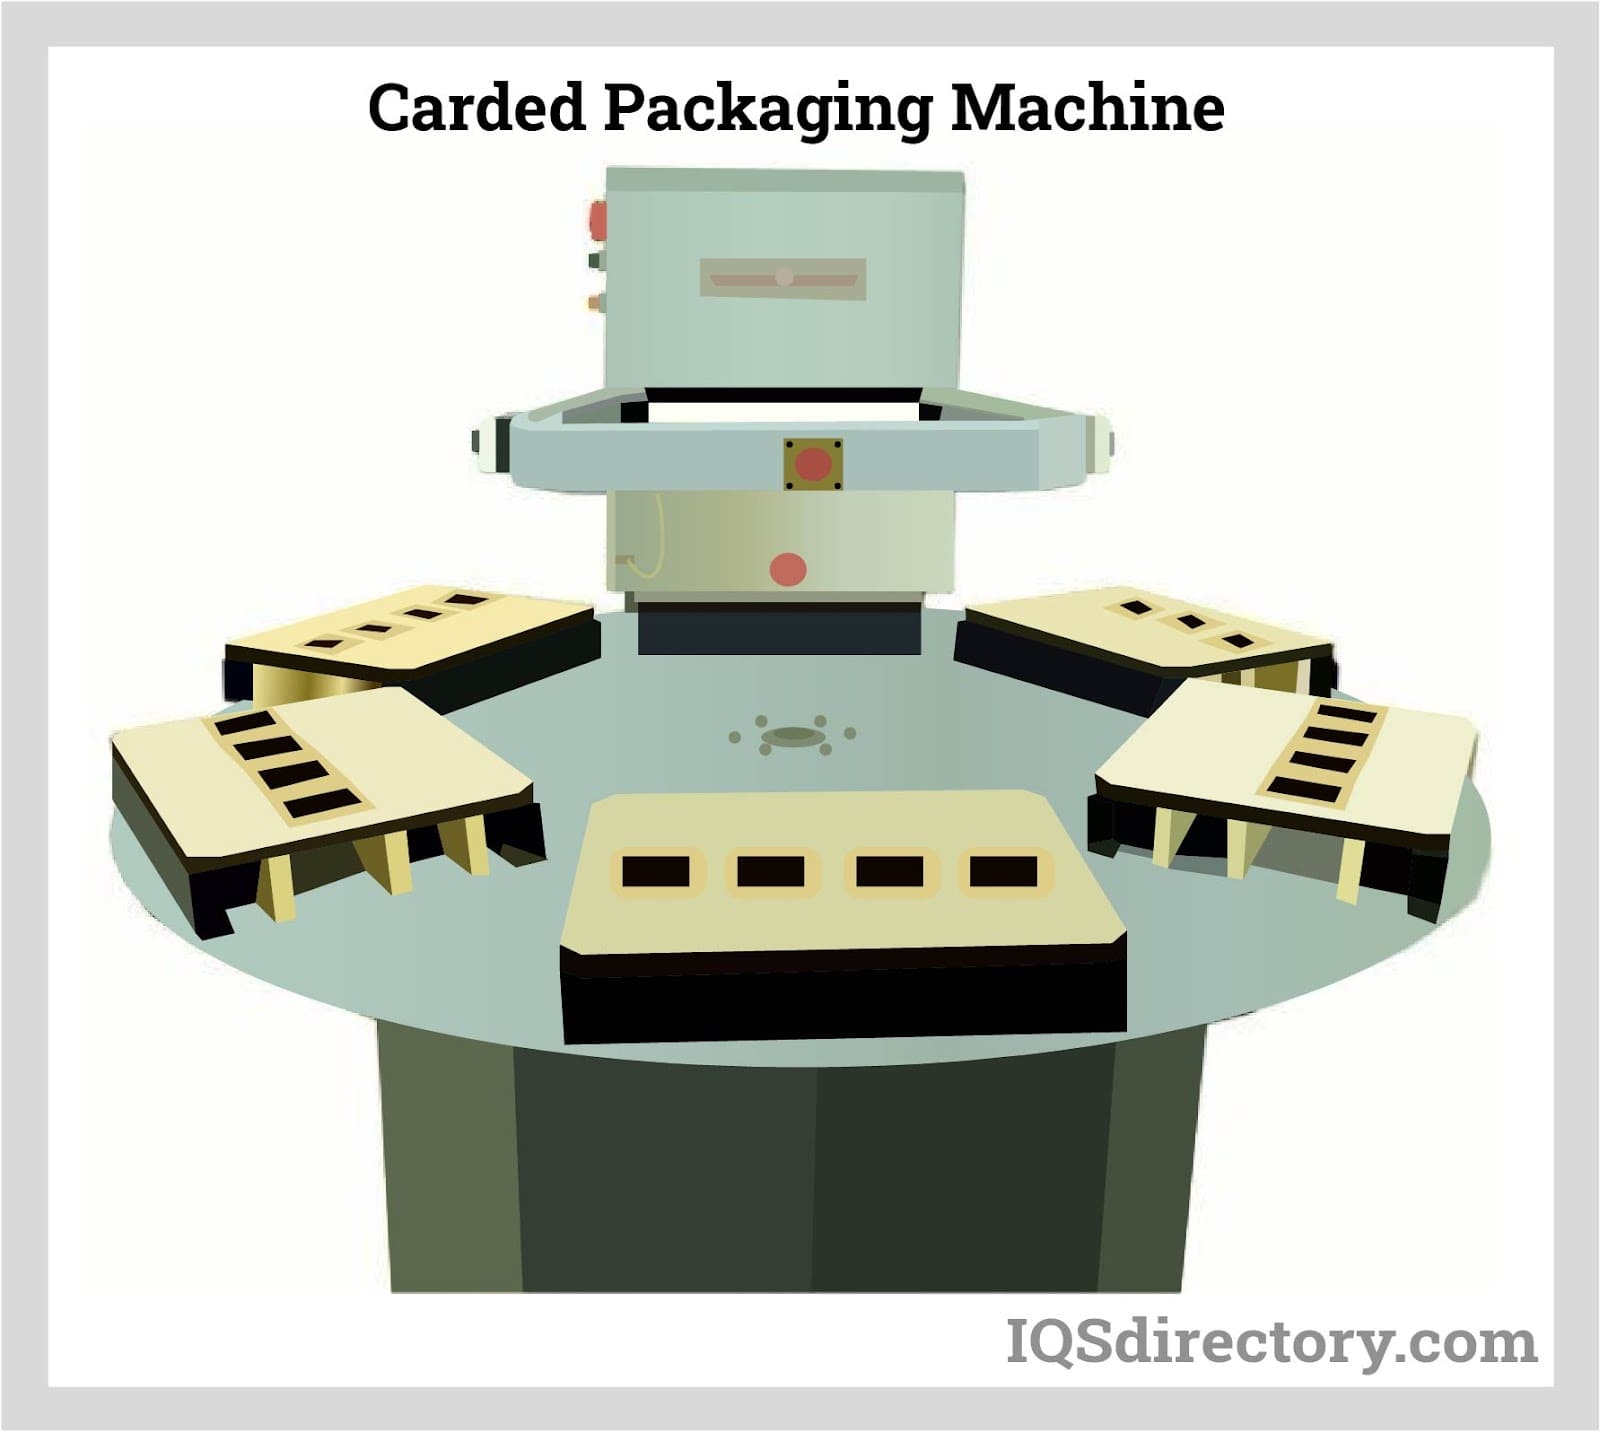 Carded Packaging Machine